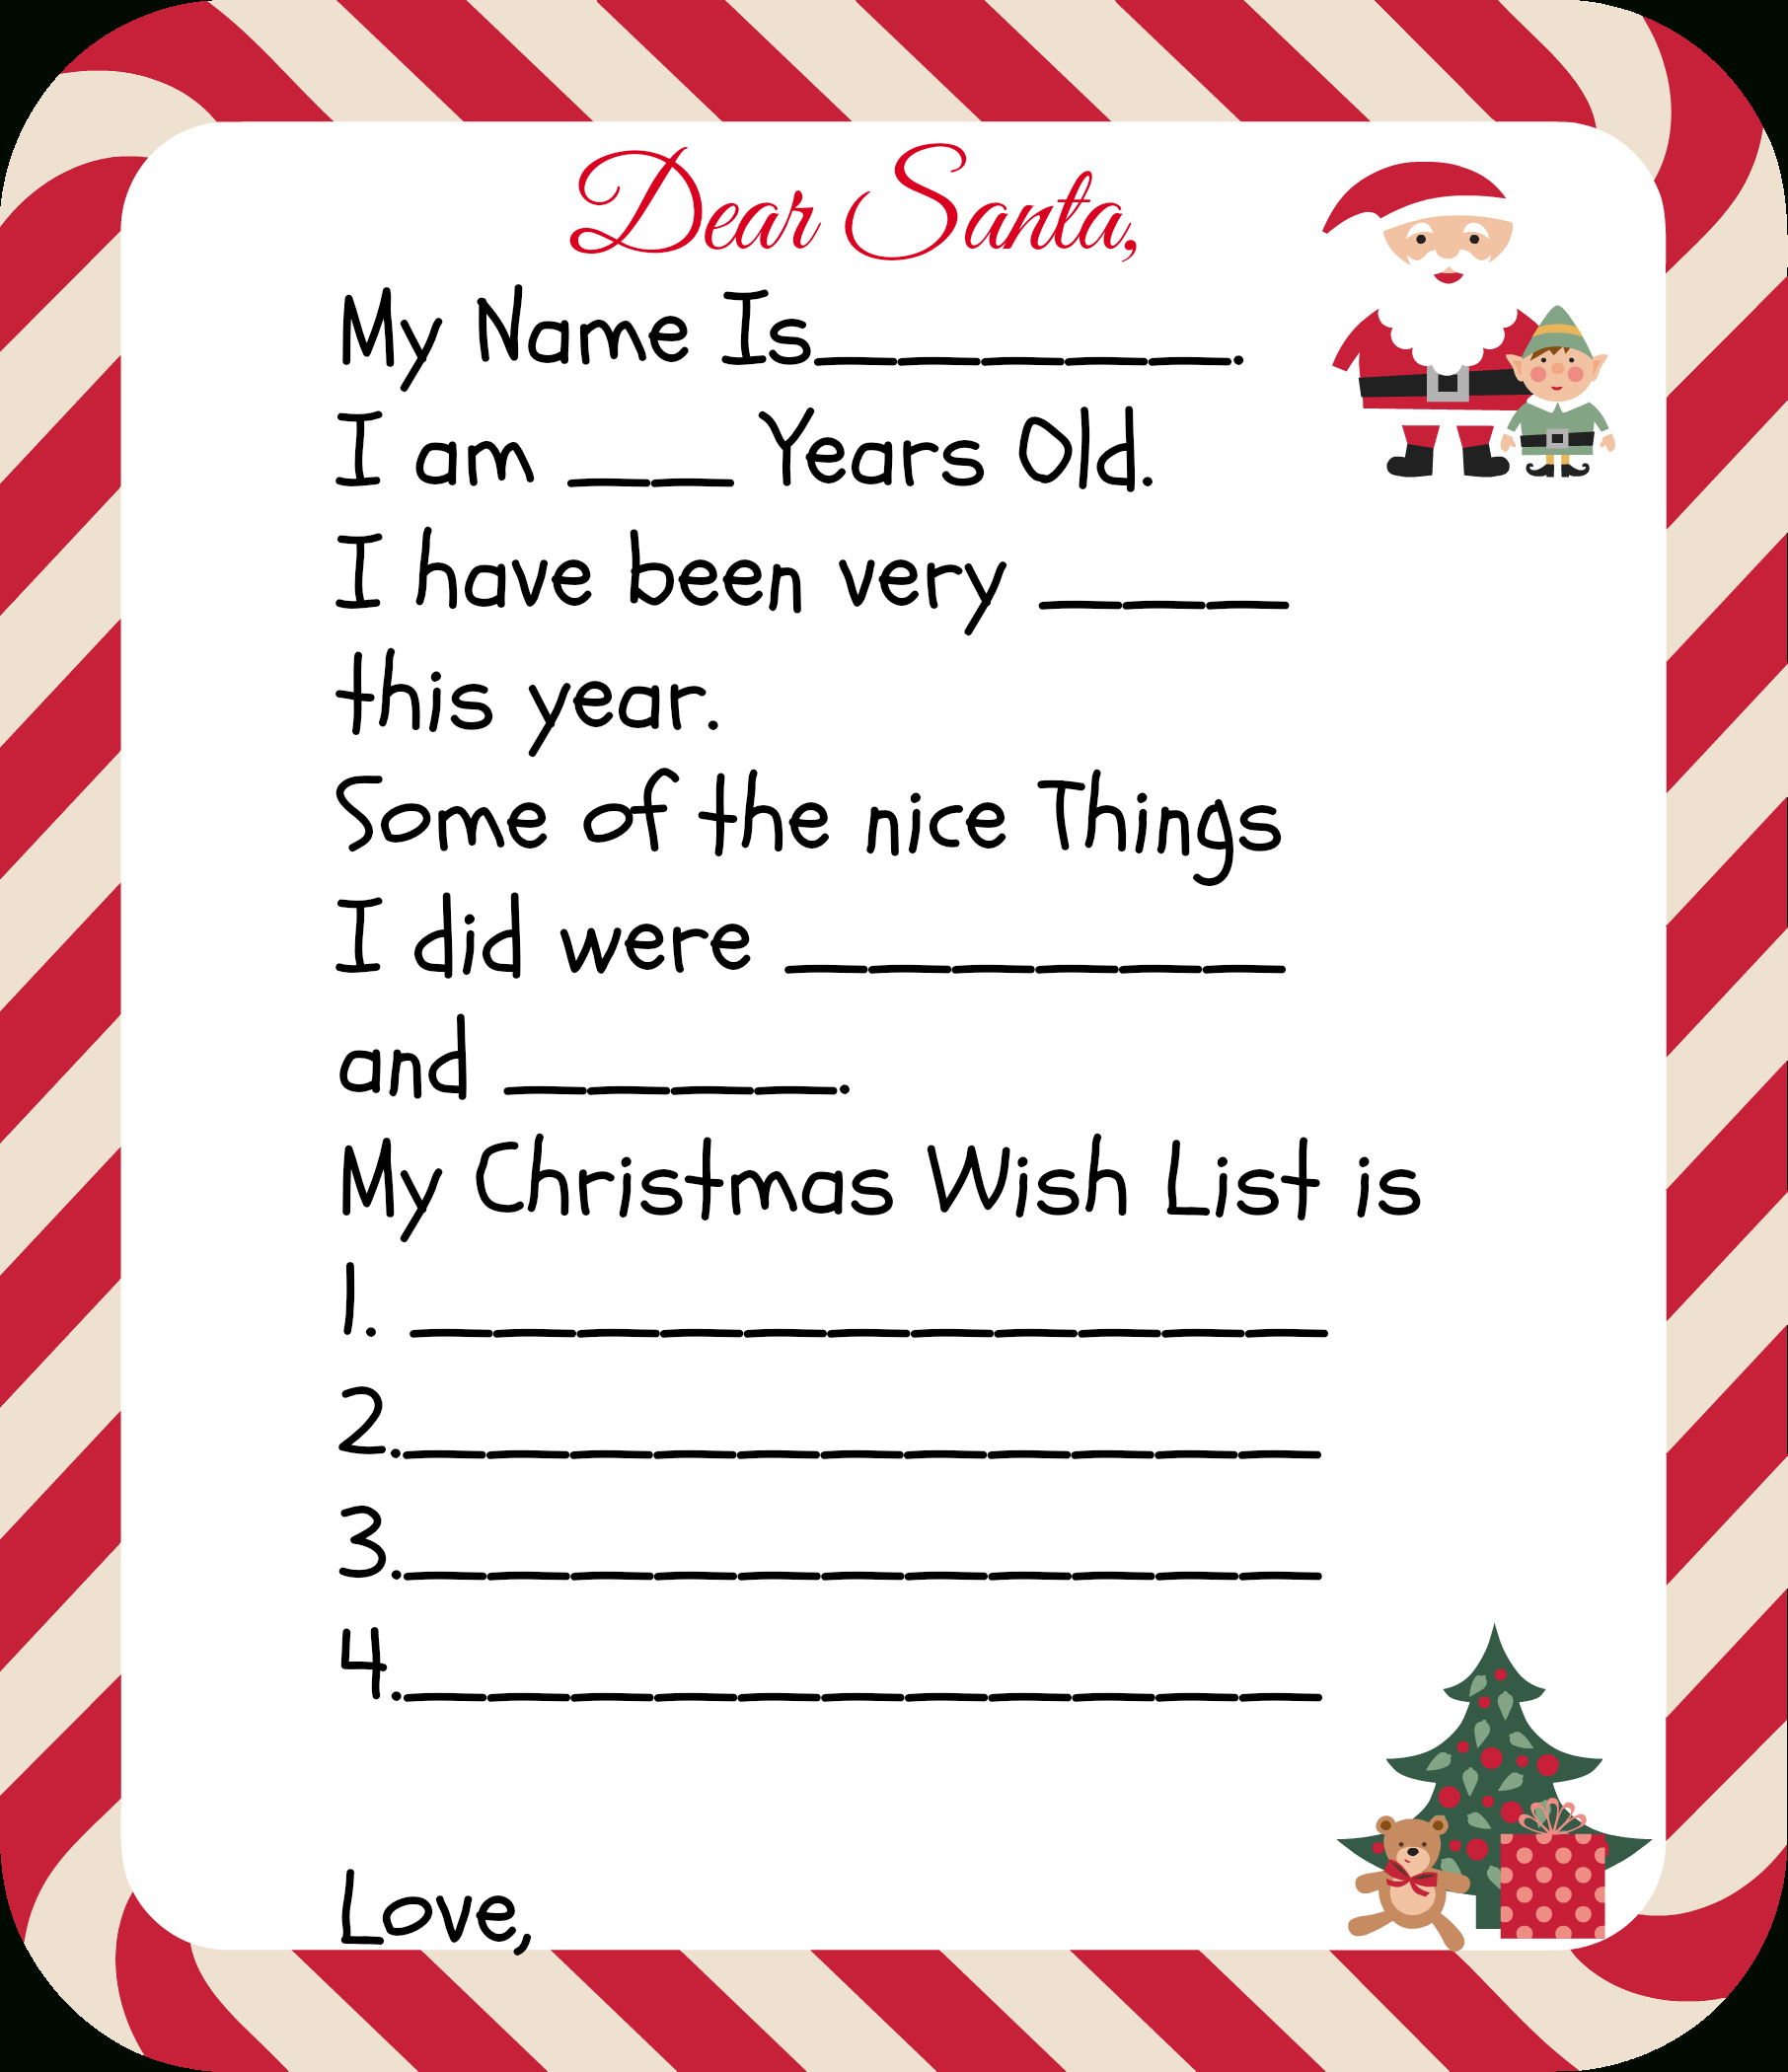 Free Printable Santa Letters For Kids | Holiday Ideas: Christmas - Free Printable Santa Letter Paper